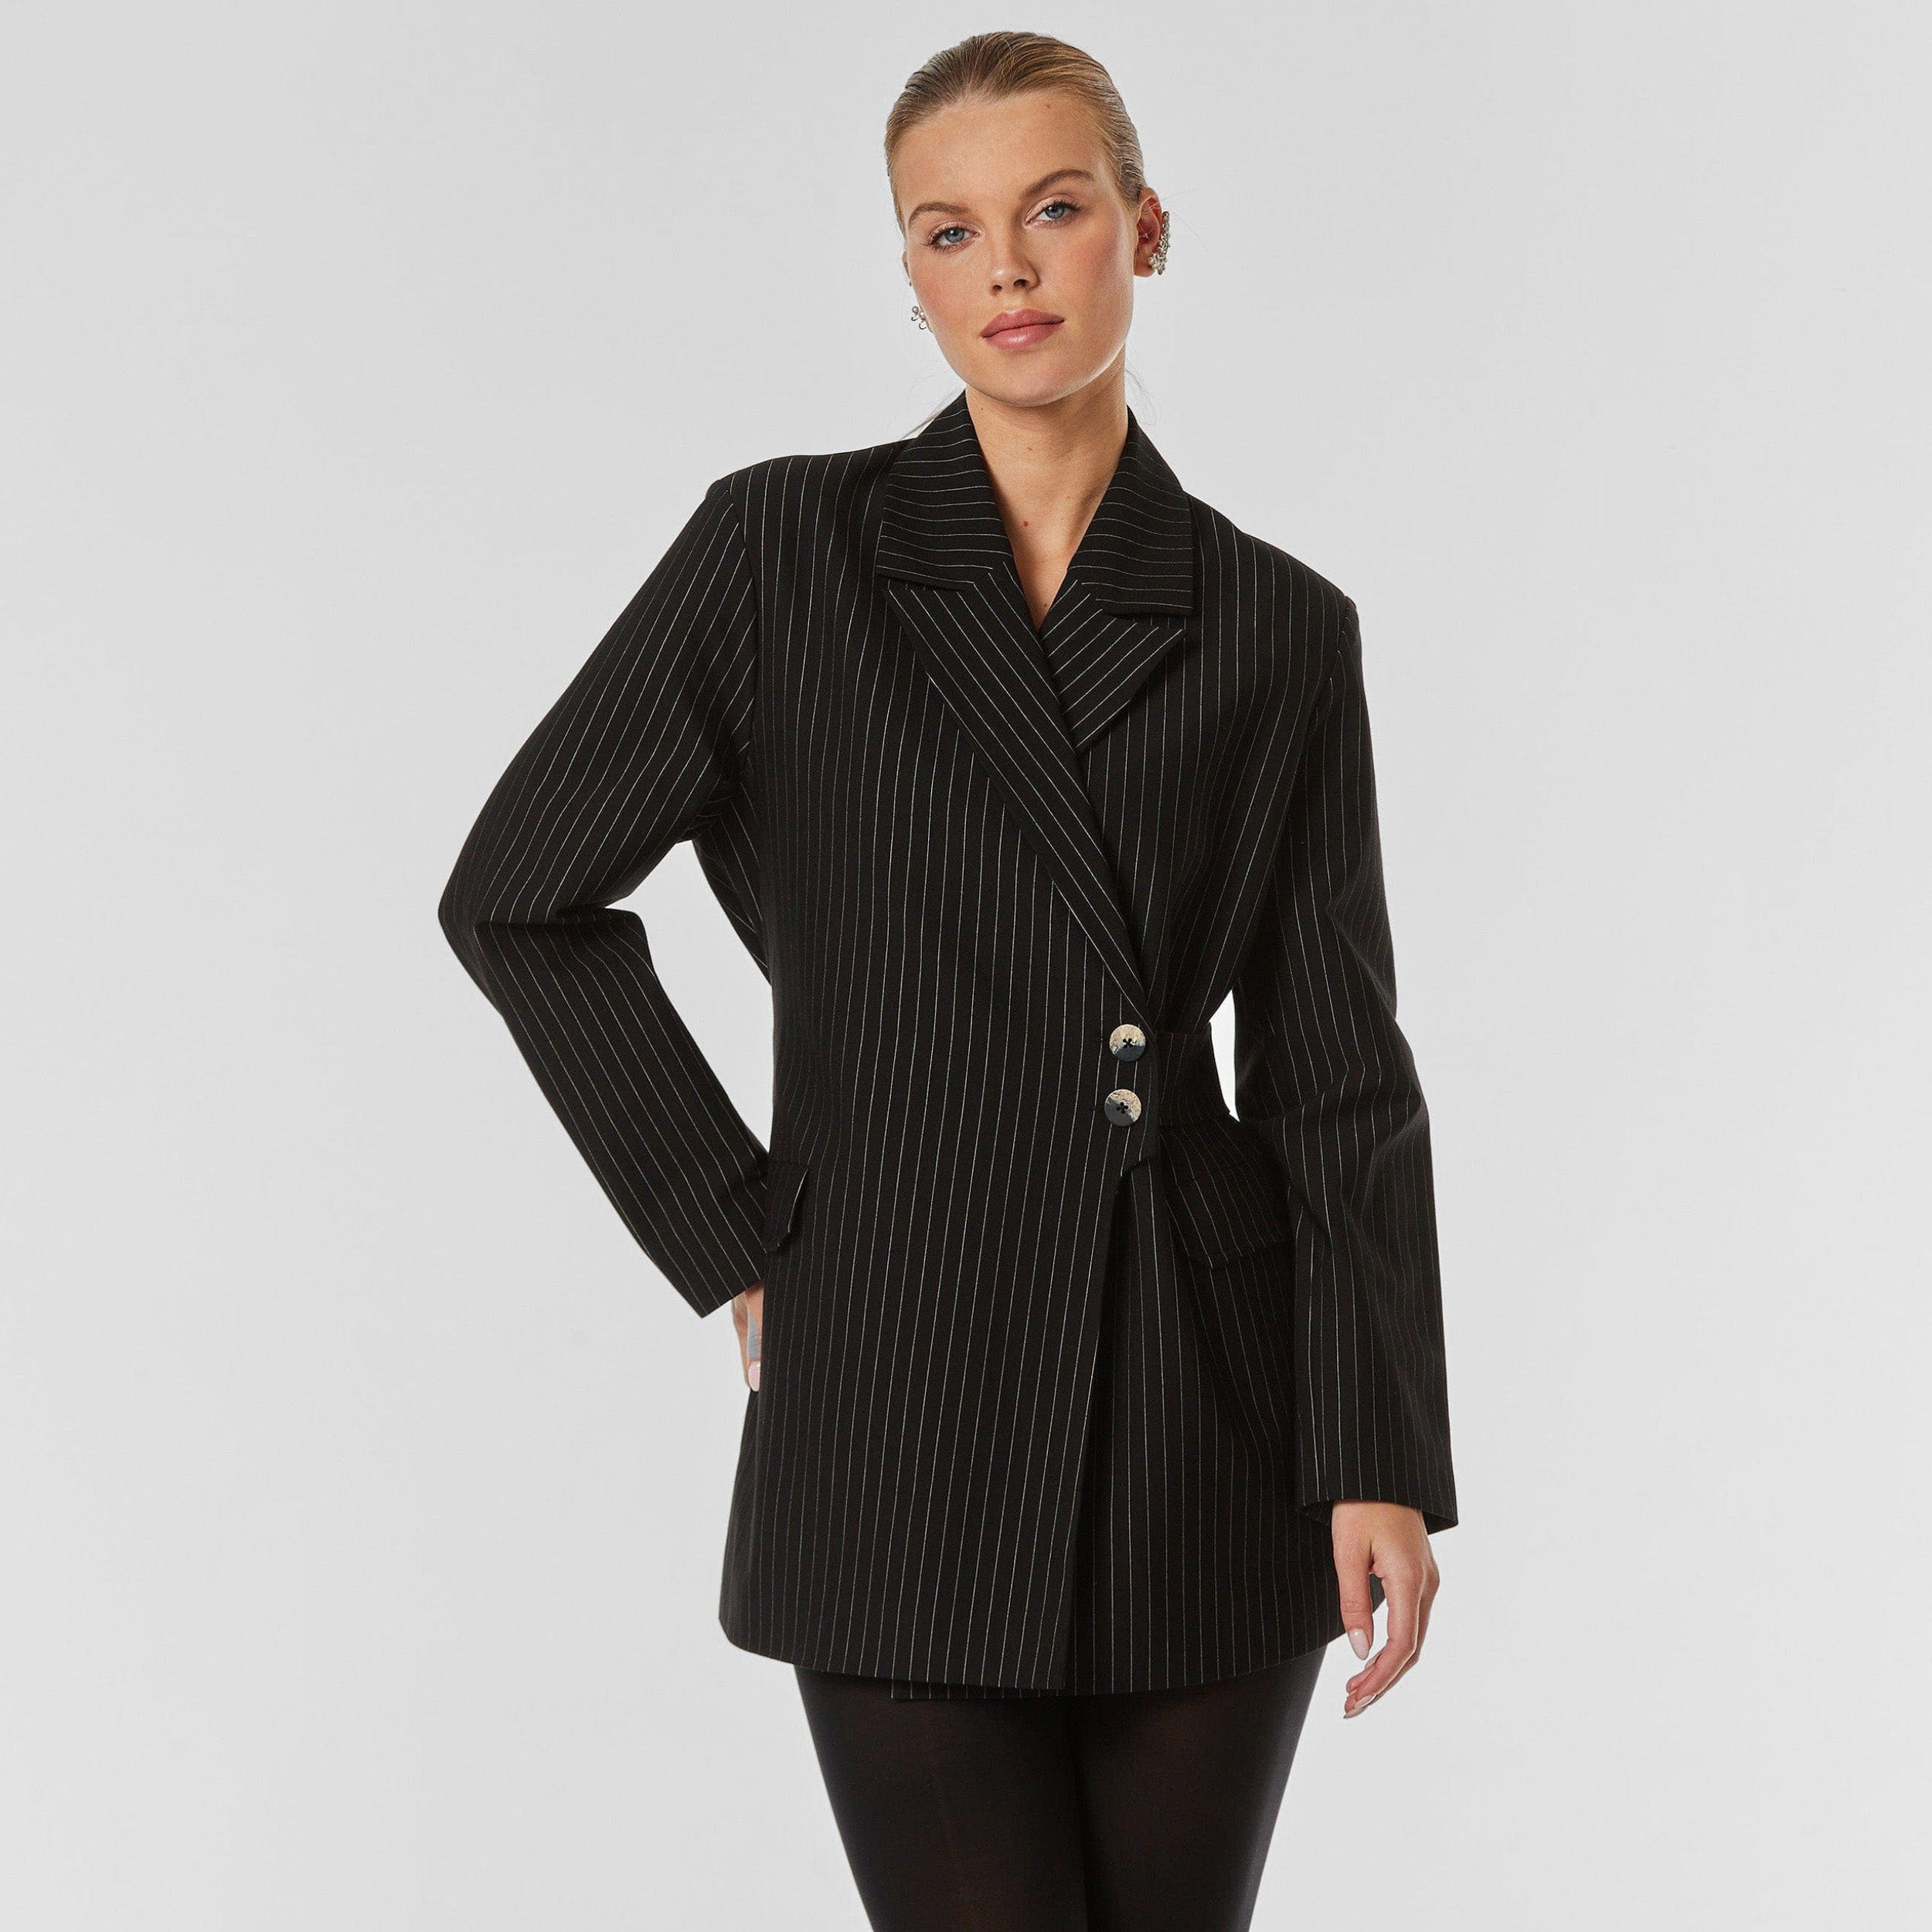 Front view of woman wearing black pinstripe blazer, featuring peaked lapel, flap pockets, detachable belt with button closure, flap pockets and silky lining.